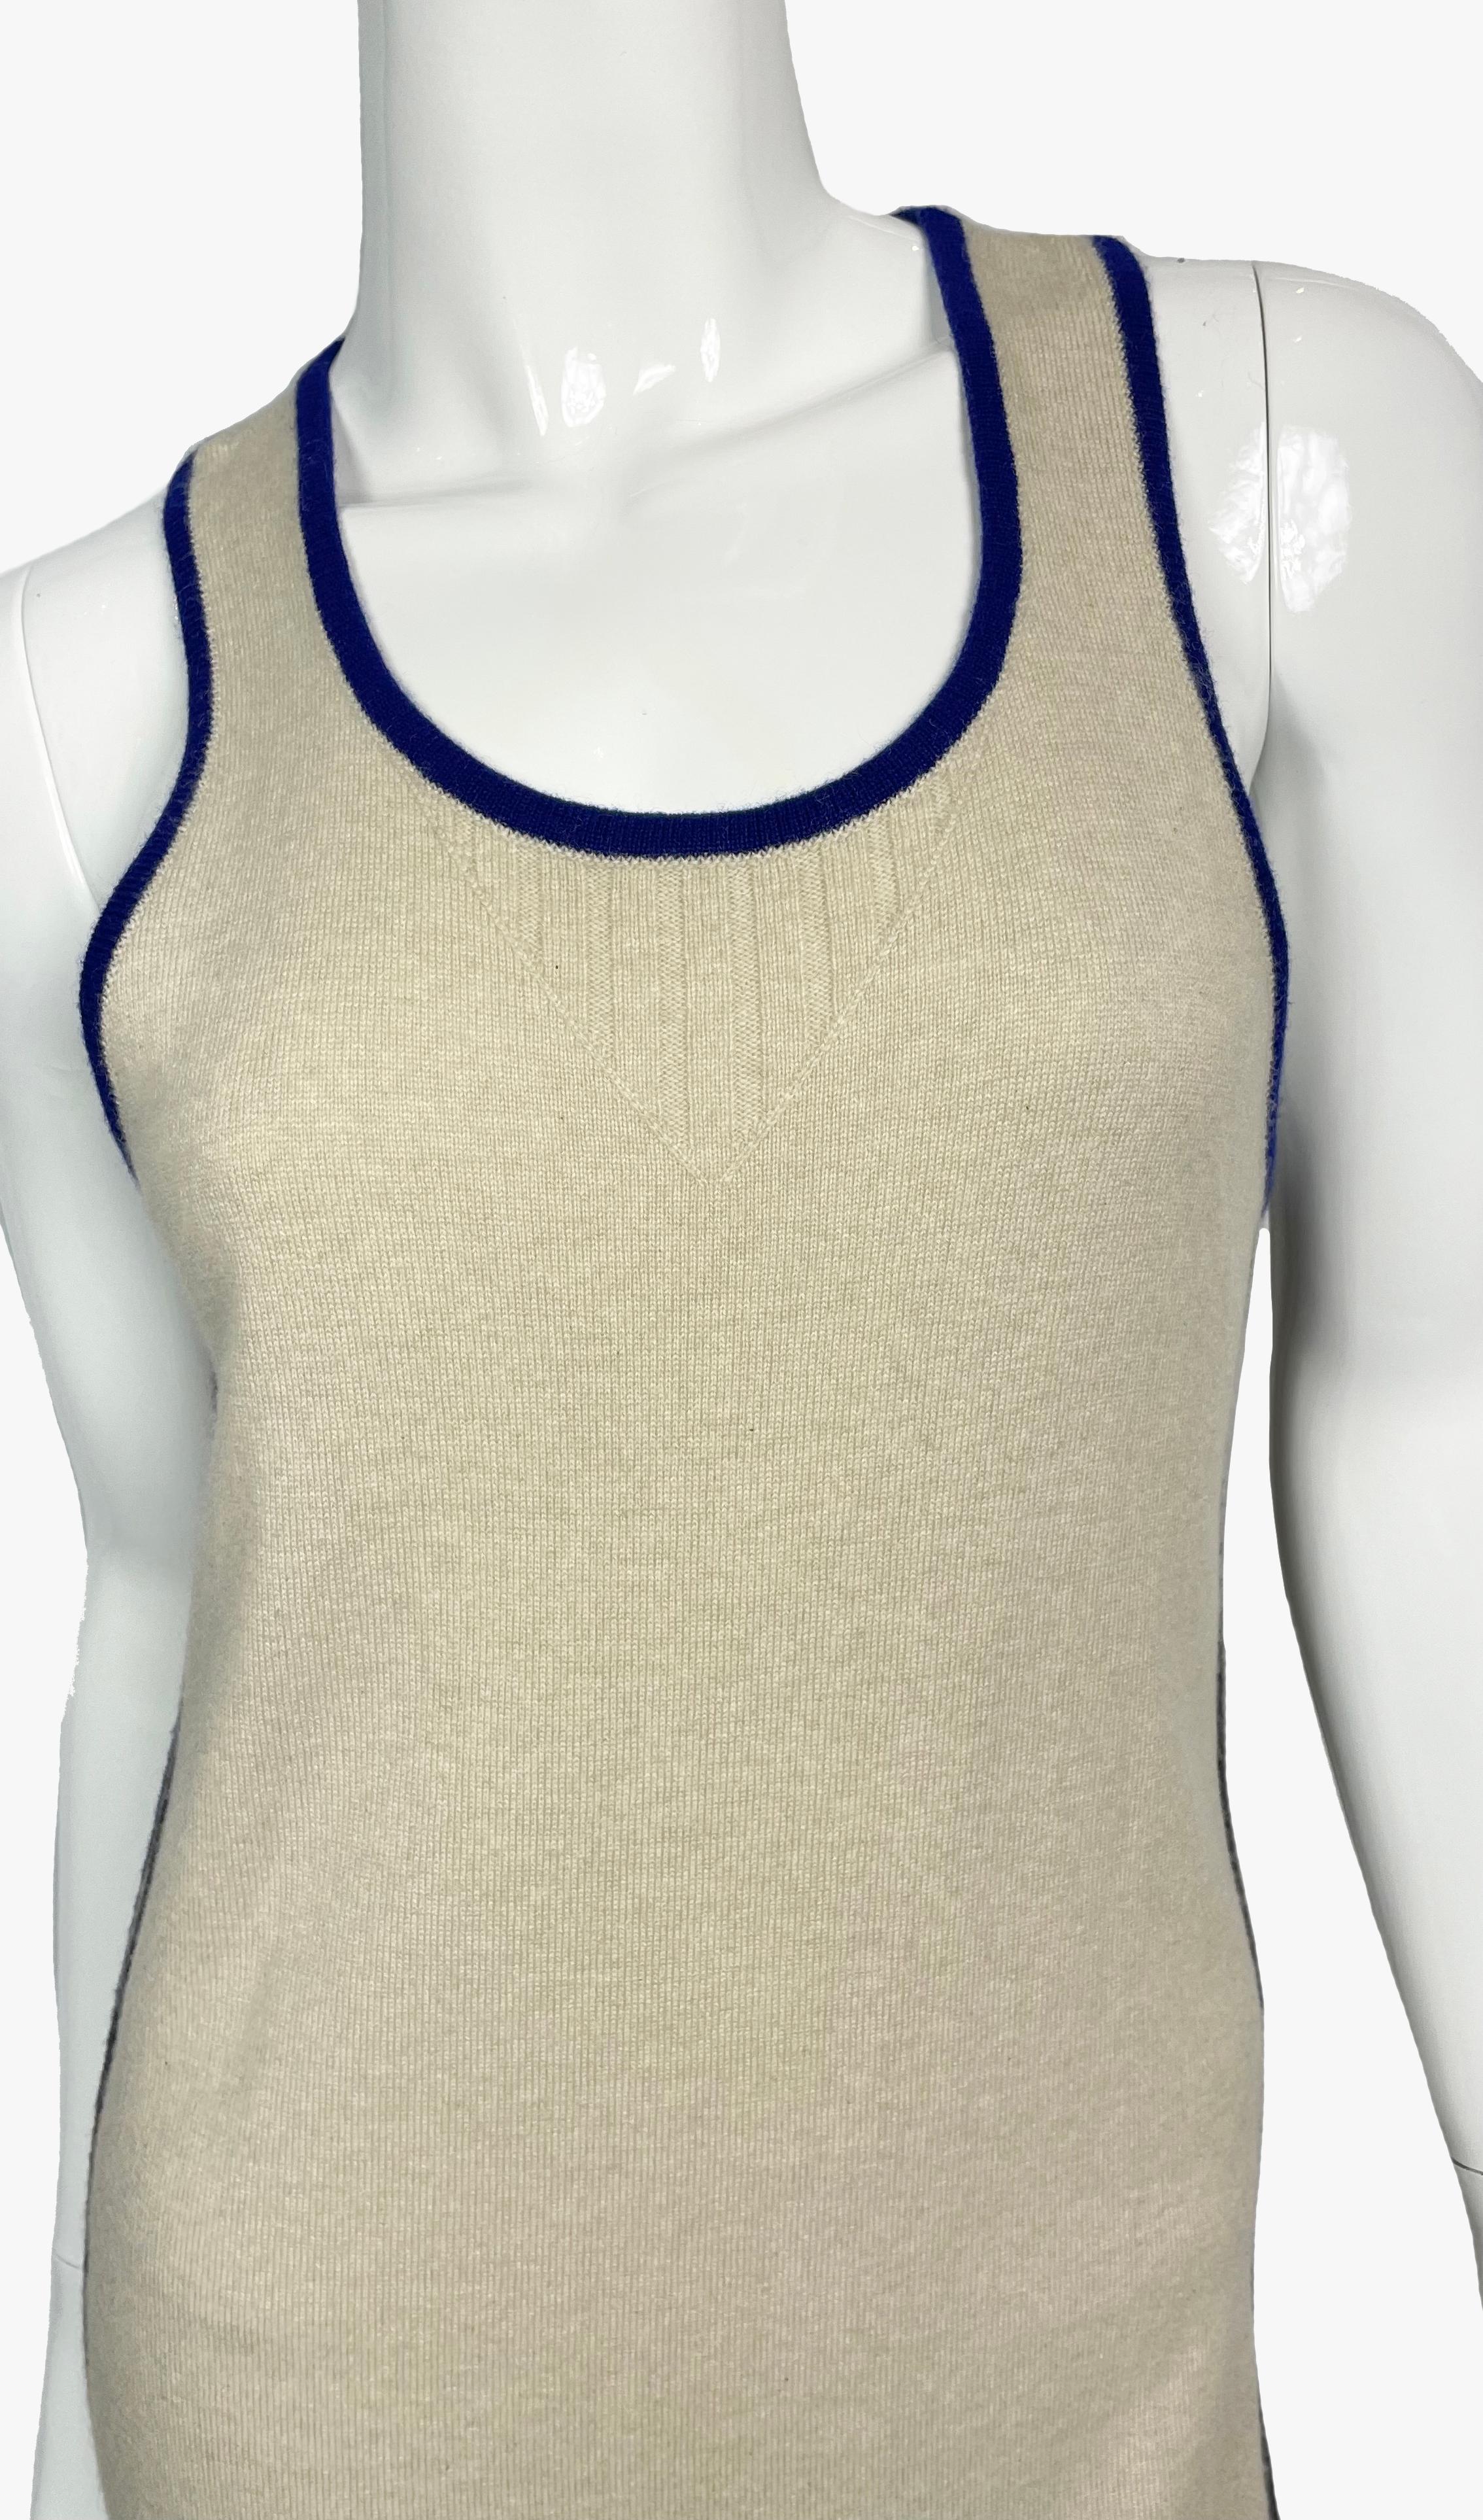 Chanel sand color cashmere tank dress with blue piping and a kangaroo pocket. 
CC logo at the back. 
Period: early 2010s
Size: FR 36
Overall length - 91 cm
Height from shoulder to armpit - 25 cm
Armpit to Armpit - 36 cm
Waist - 78 cm
Hips - 82